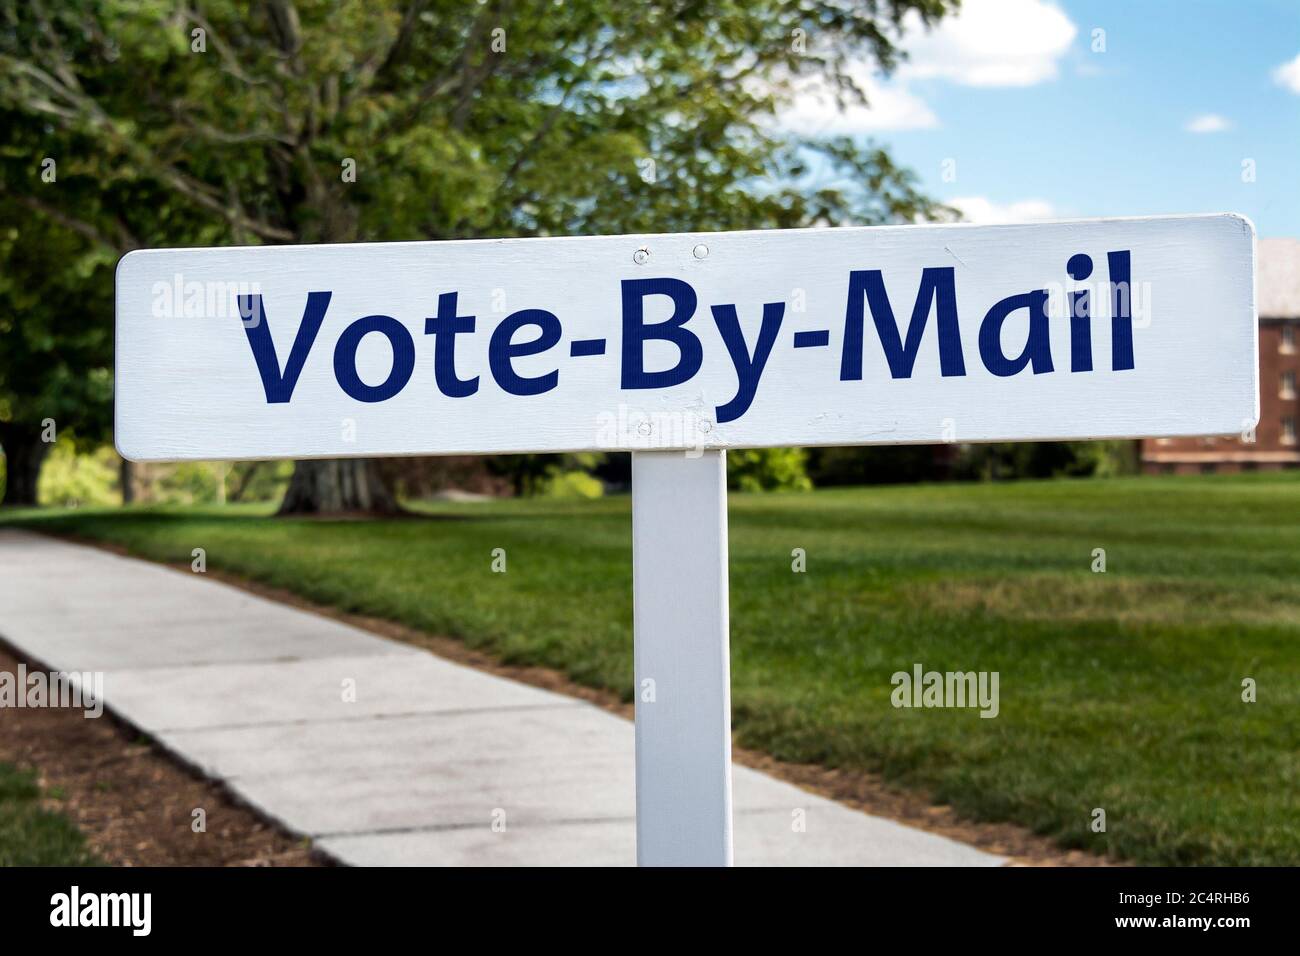 Sign encourages voting by mail. Stock Photo